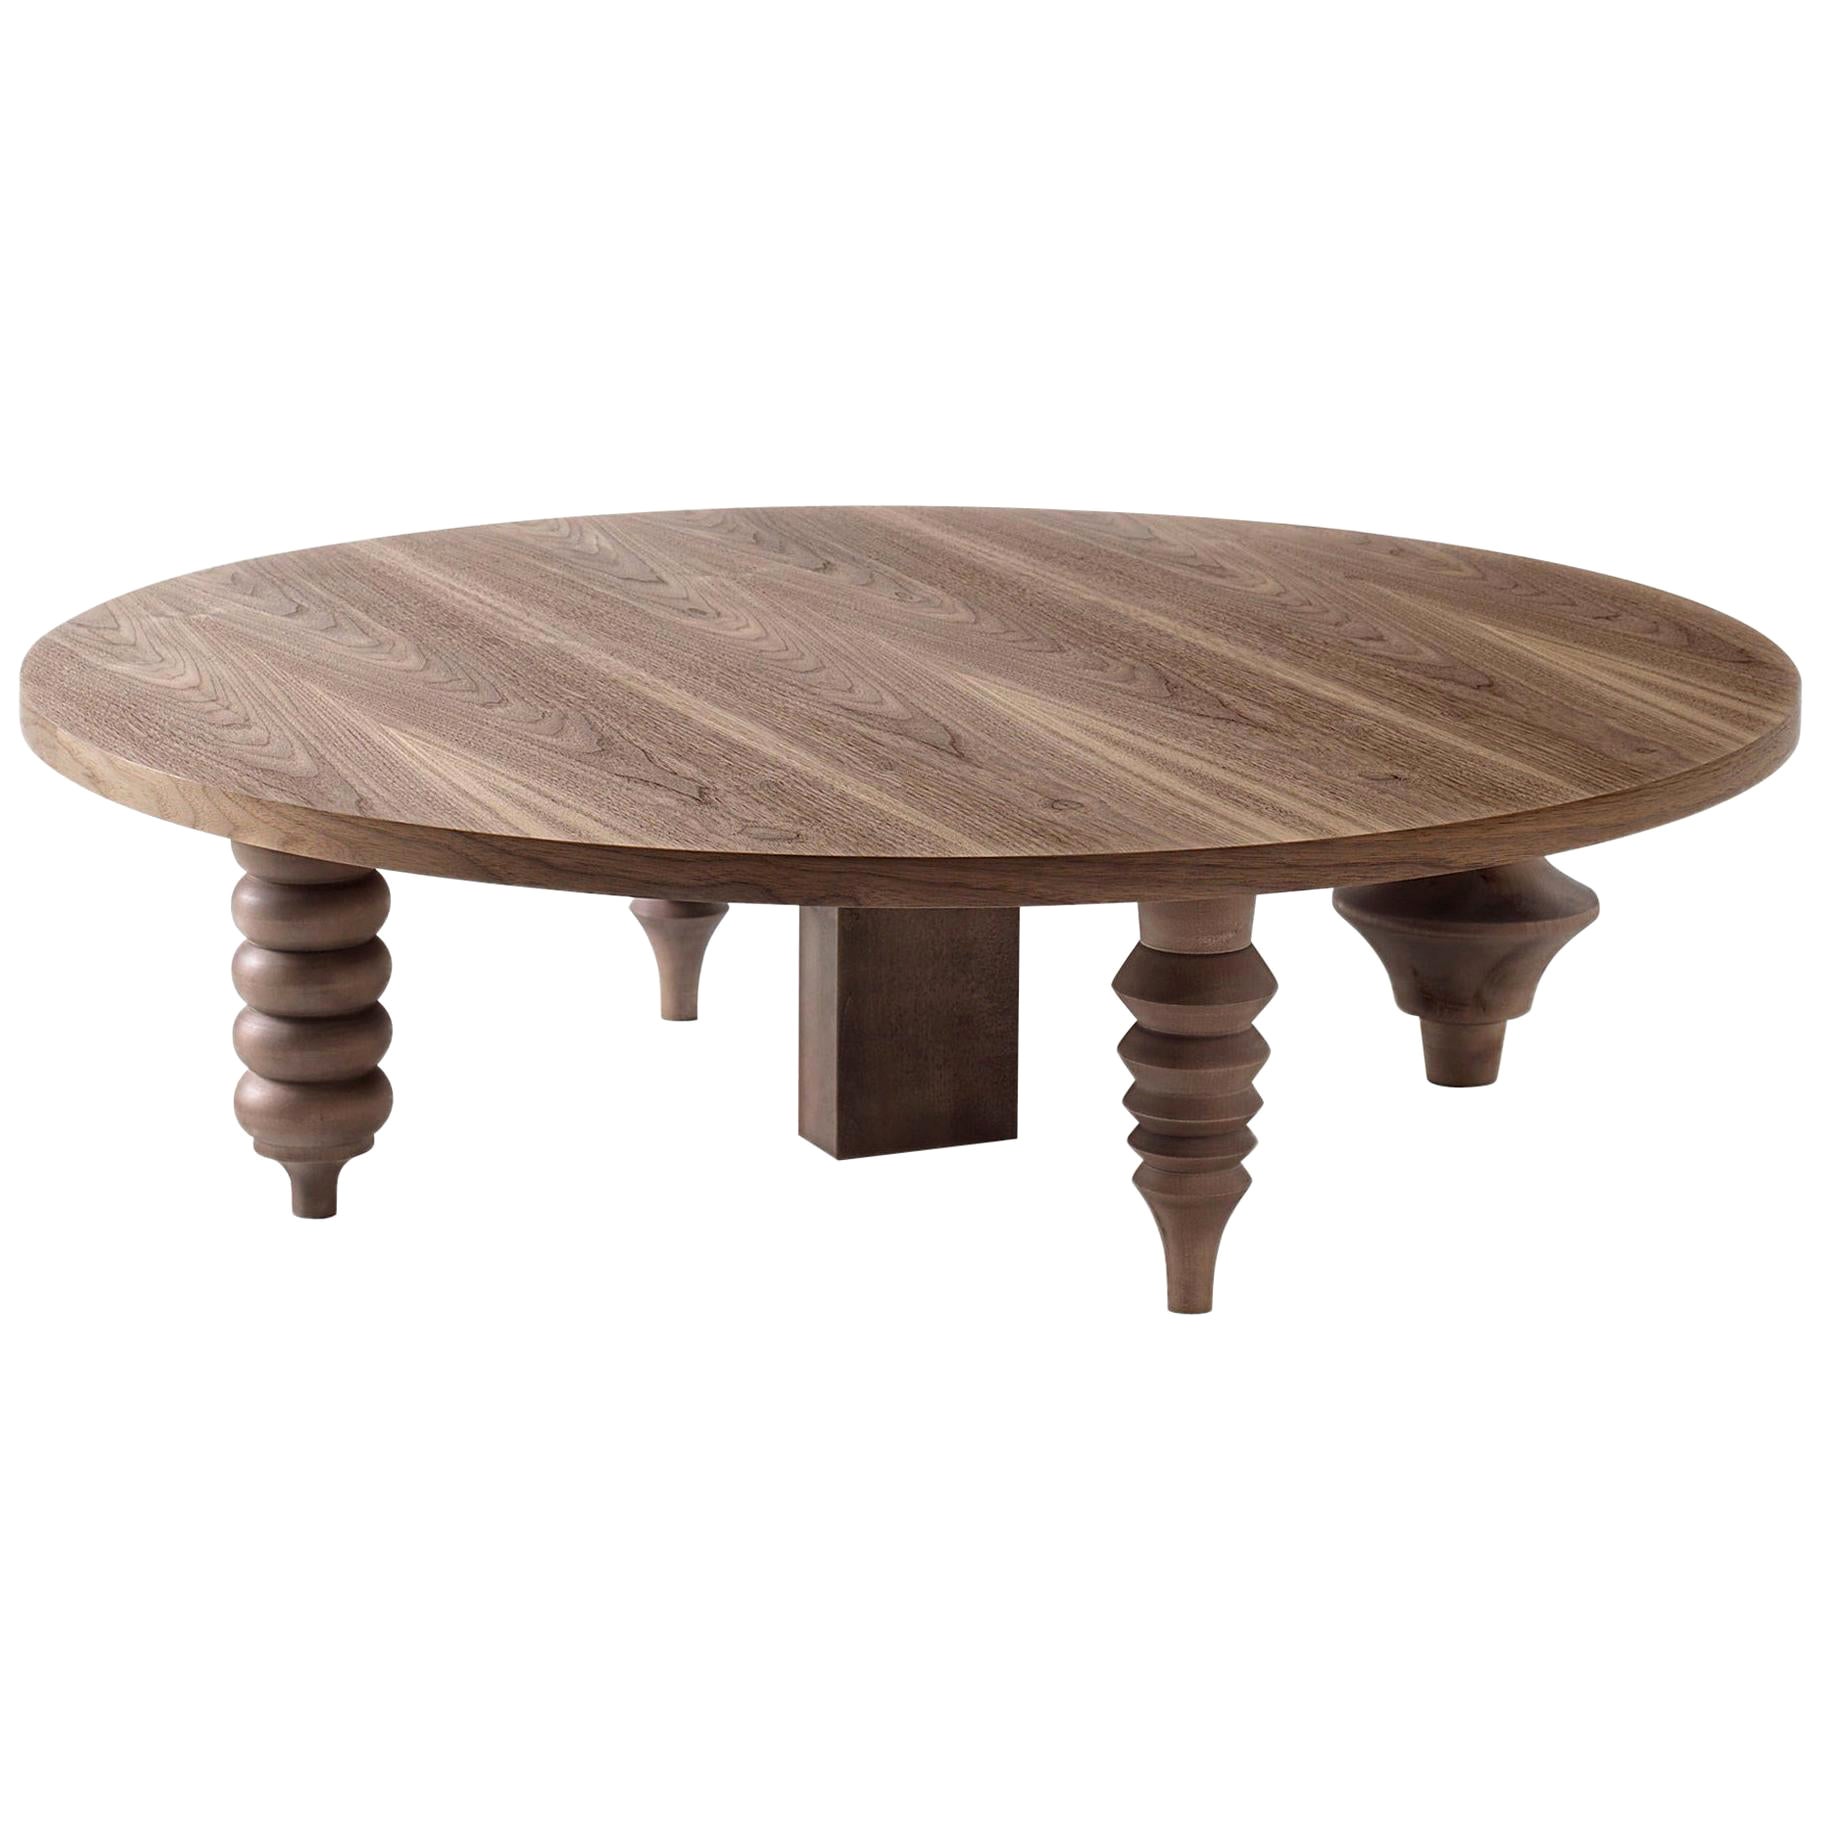 Jaime Hayon Contemporary Rounded Multi Leg Low Wood Table by BD Barcelona For Sale